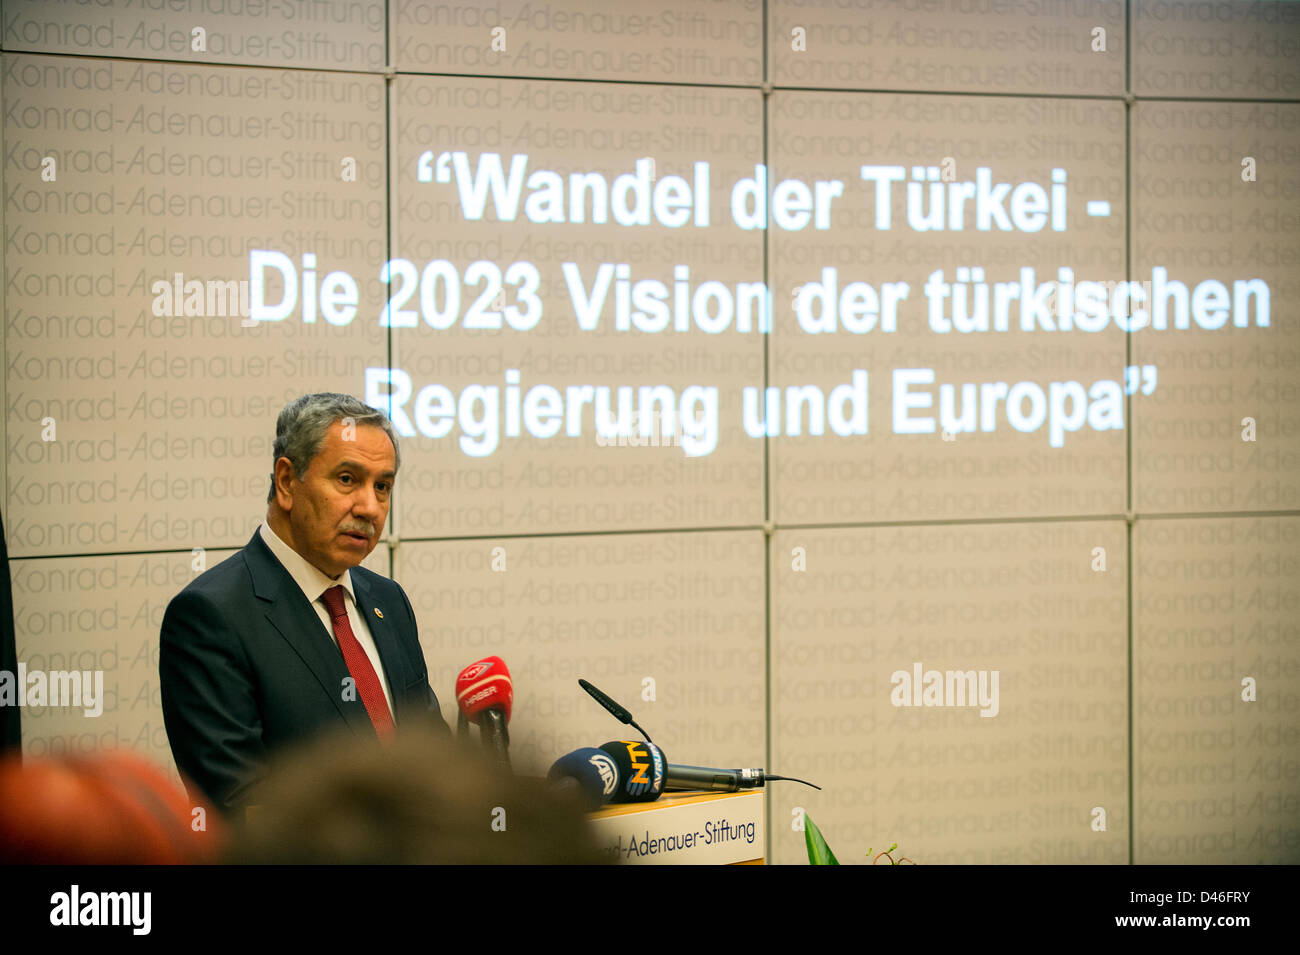 Berlin, Germany. 6th March, 2013.  Deputy Prime Minister of Turkey Bülent Arinç gives a speech about the 2023 Vision of the Turkish Government and Europe. the session was stoped by some protesters from TGB (Turkish Youth Union) against the current policy of Turkey.Credits: Credit:  Gonçalo Silva / Alamy Live News. Stock Photo